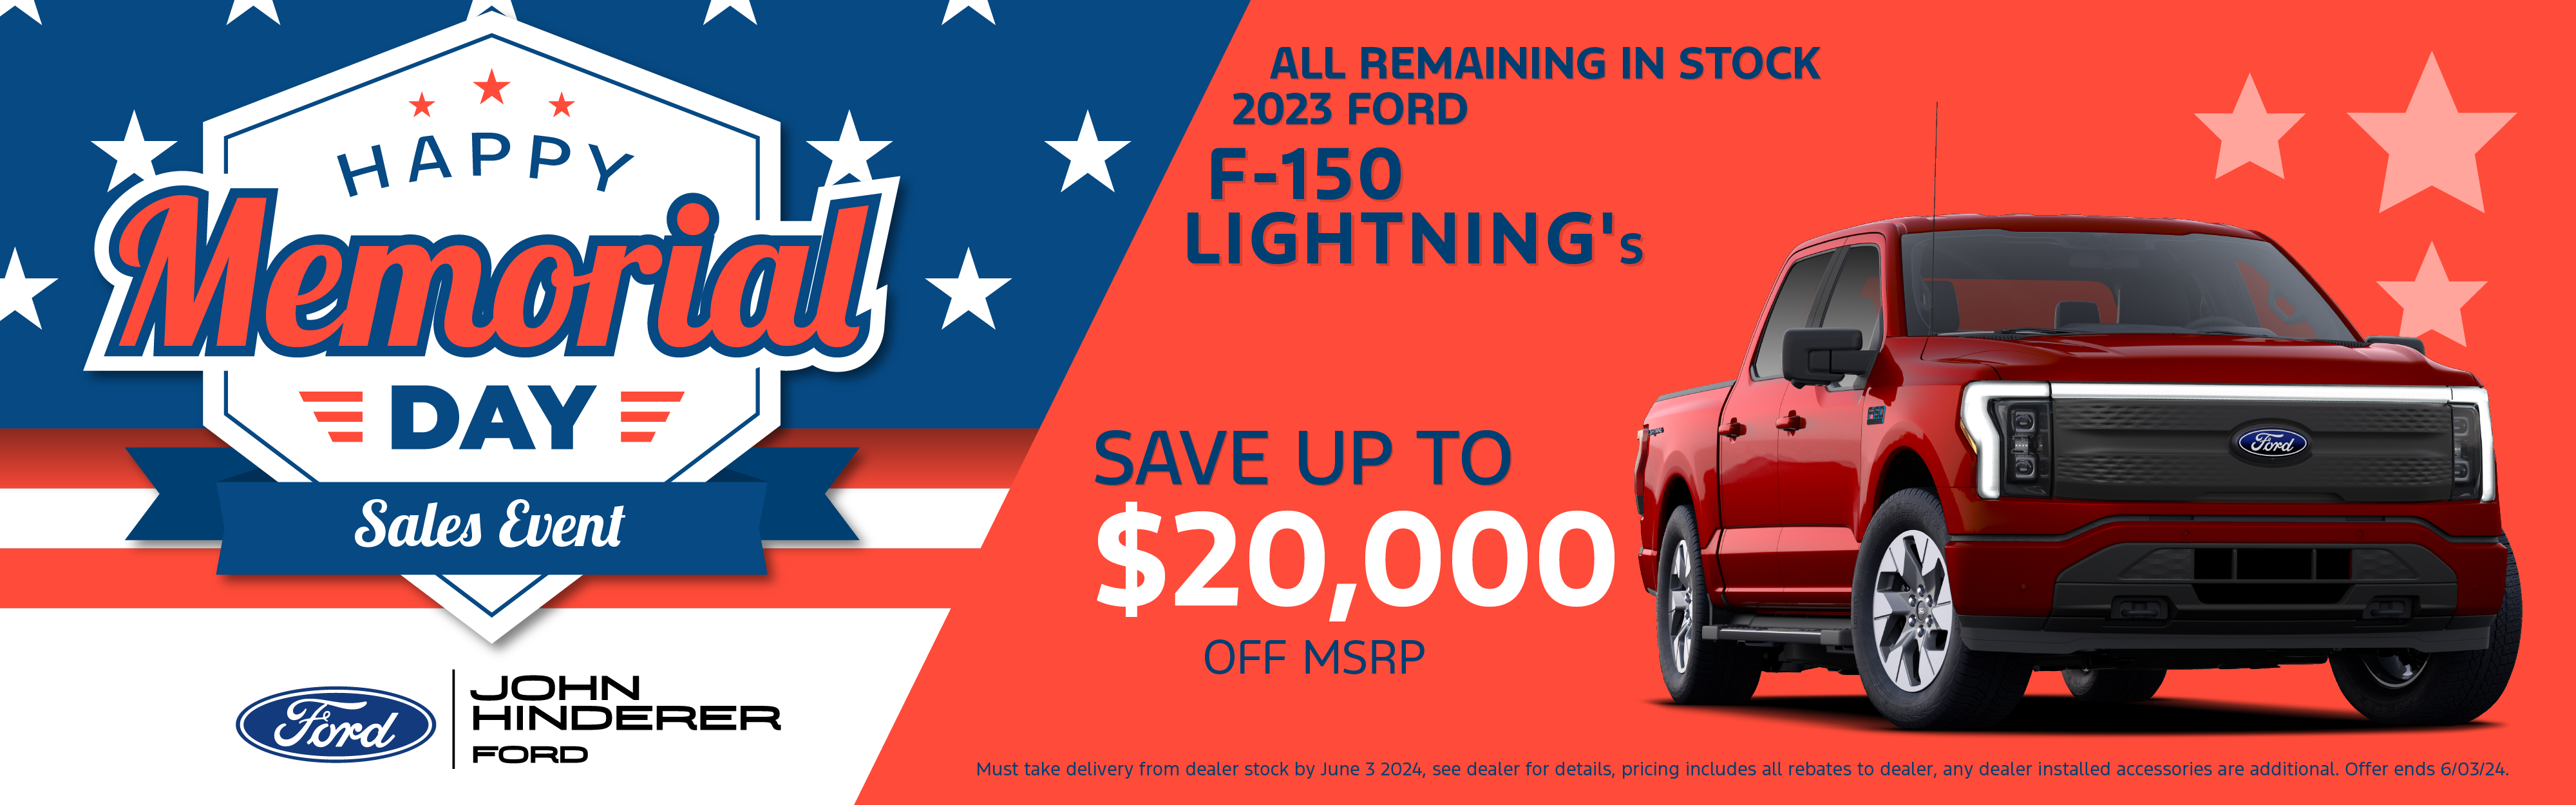 Save up to $20,000 off MSRP on 2023 F-150 Lightning